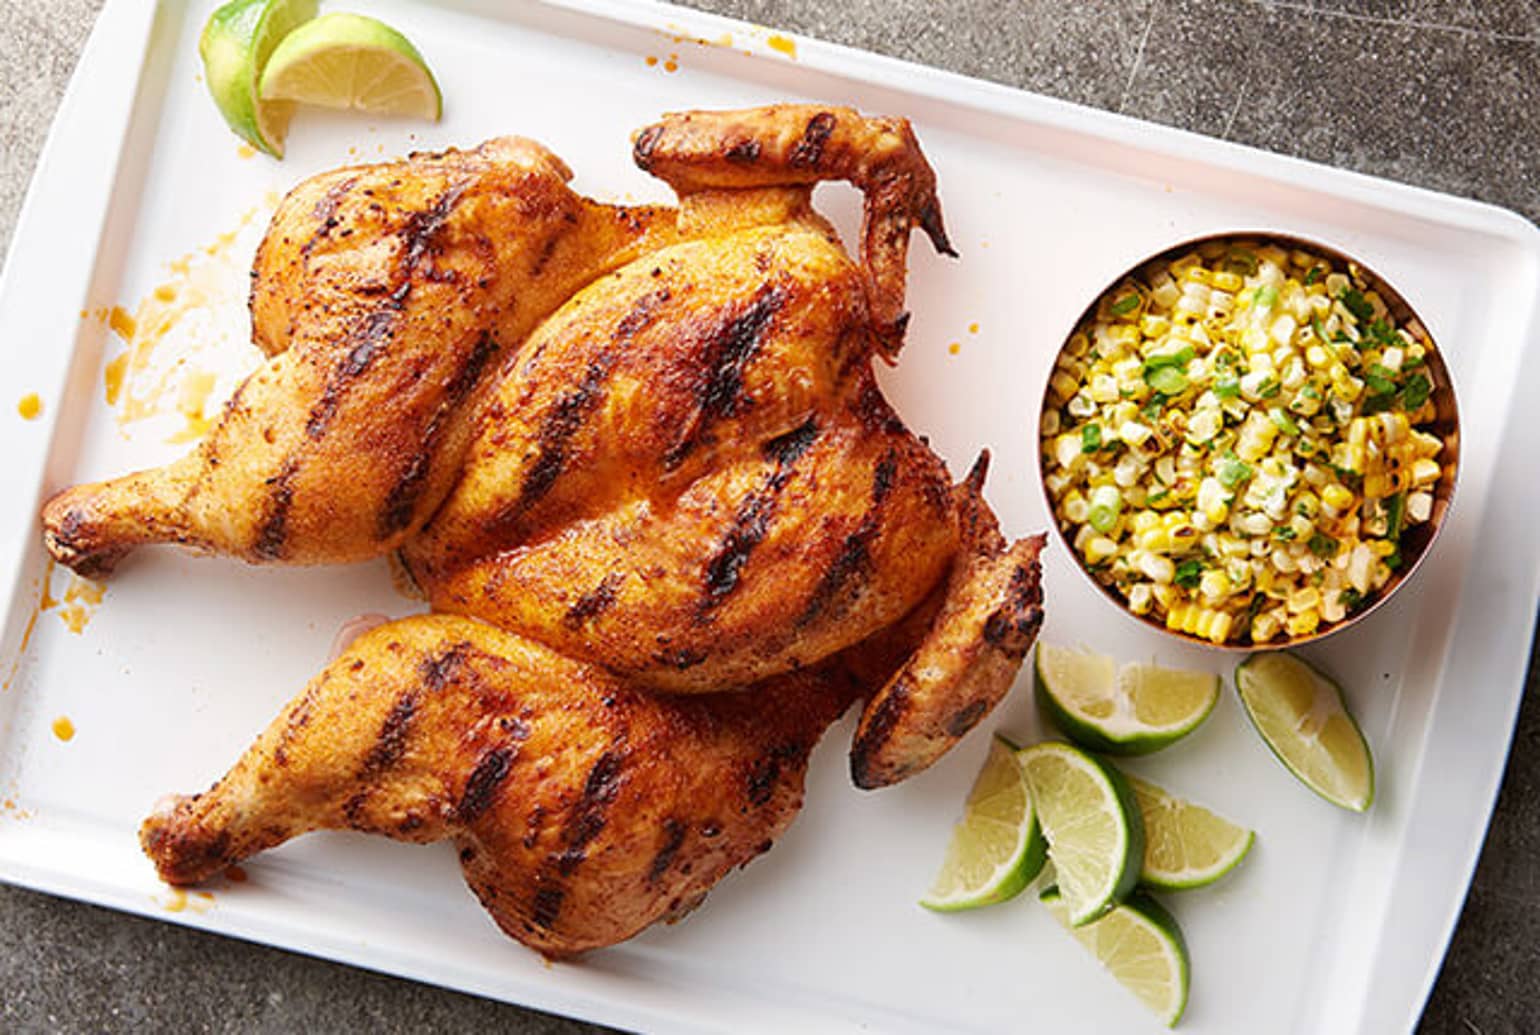 Grilled Spatchcock Chicken with Corn Salad